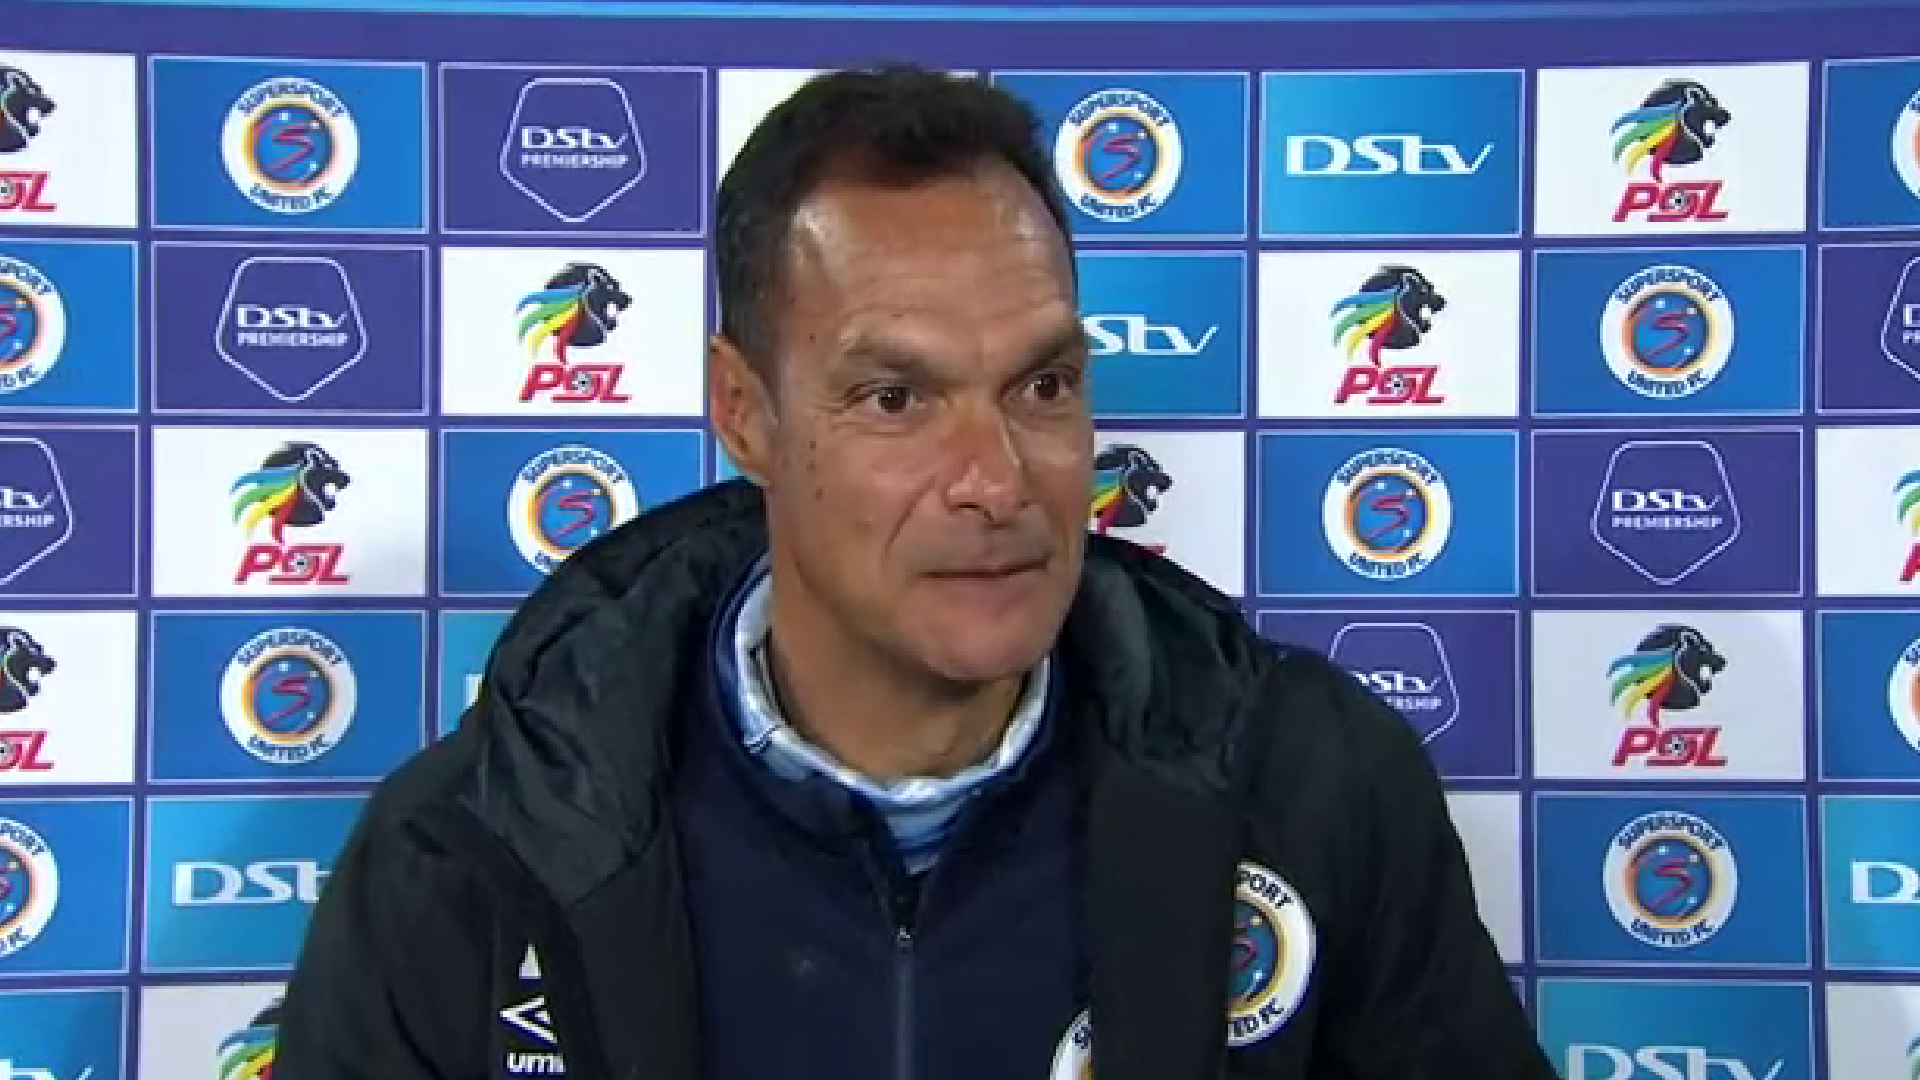 DStv Premiership | SuperSport United v Orlando Pirates | Post-match interview with Andre Arendse